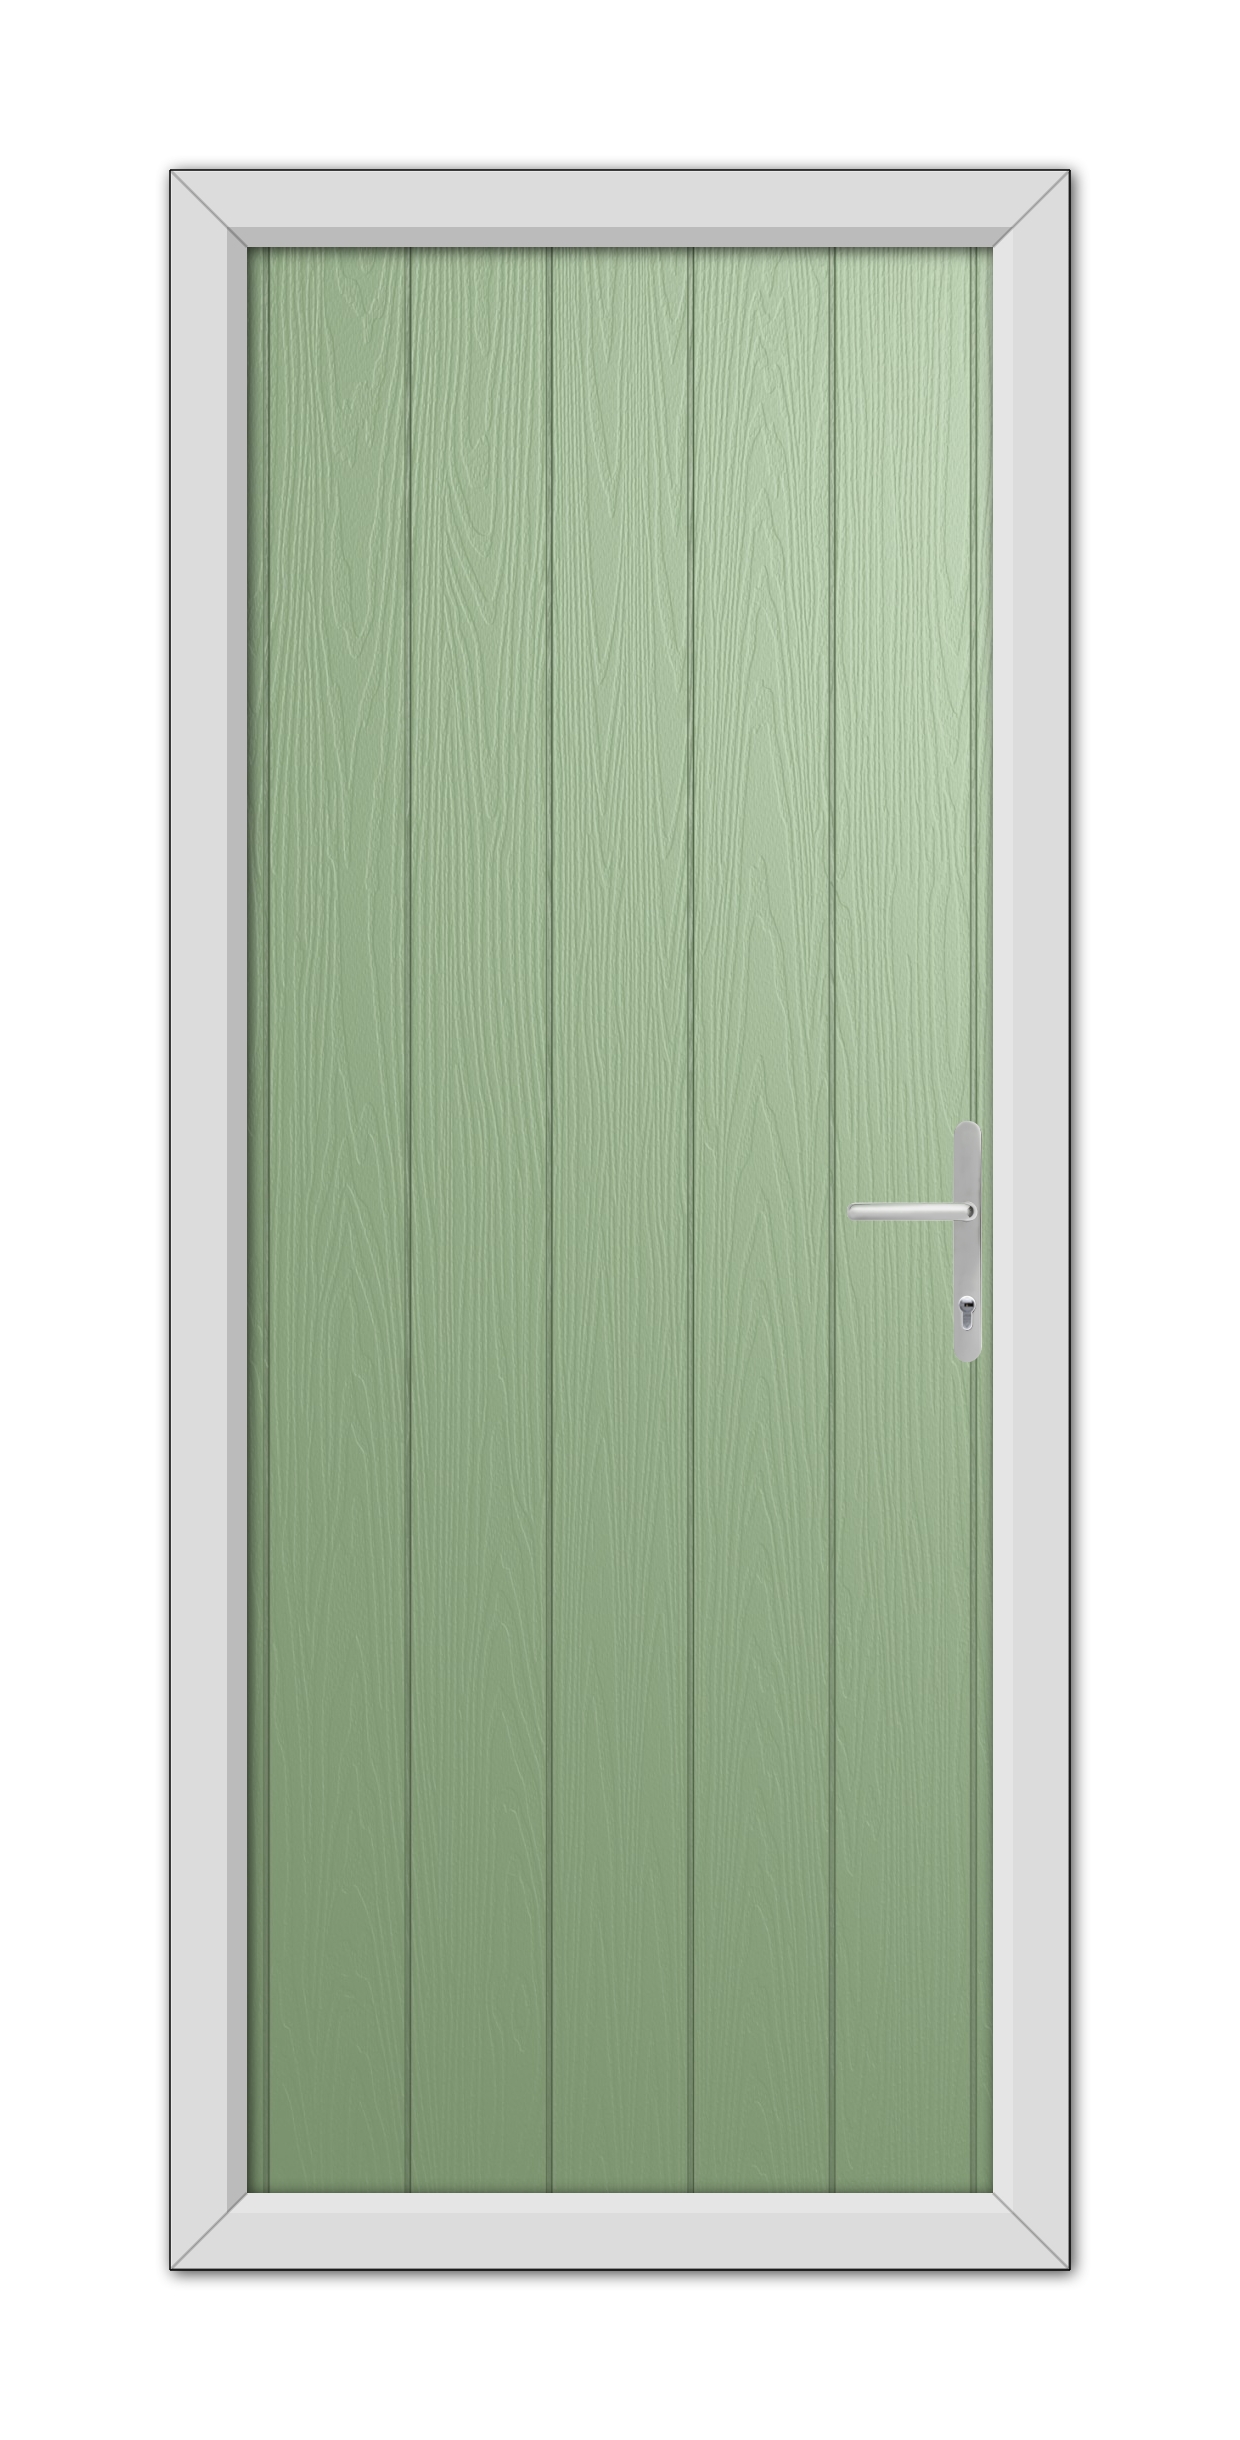 A modern Chartwell Green Norfolk Solid Composite Door 48mm Timber Core with vertical wood paneling and a silver handle, set within a simple grey frame.